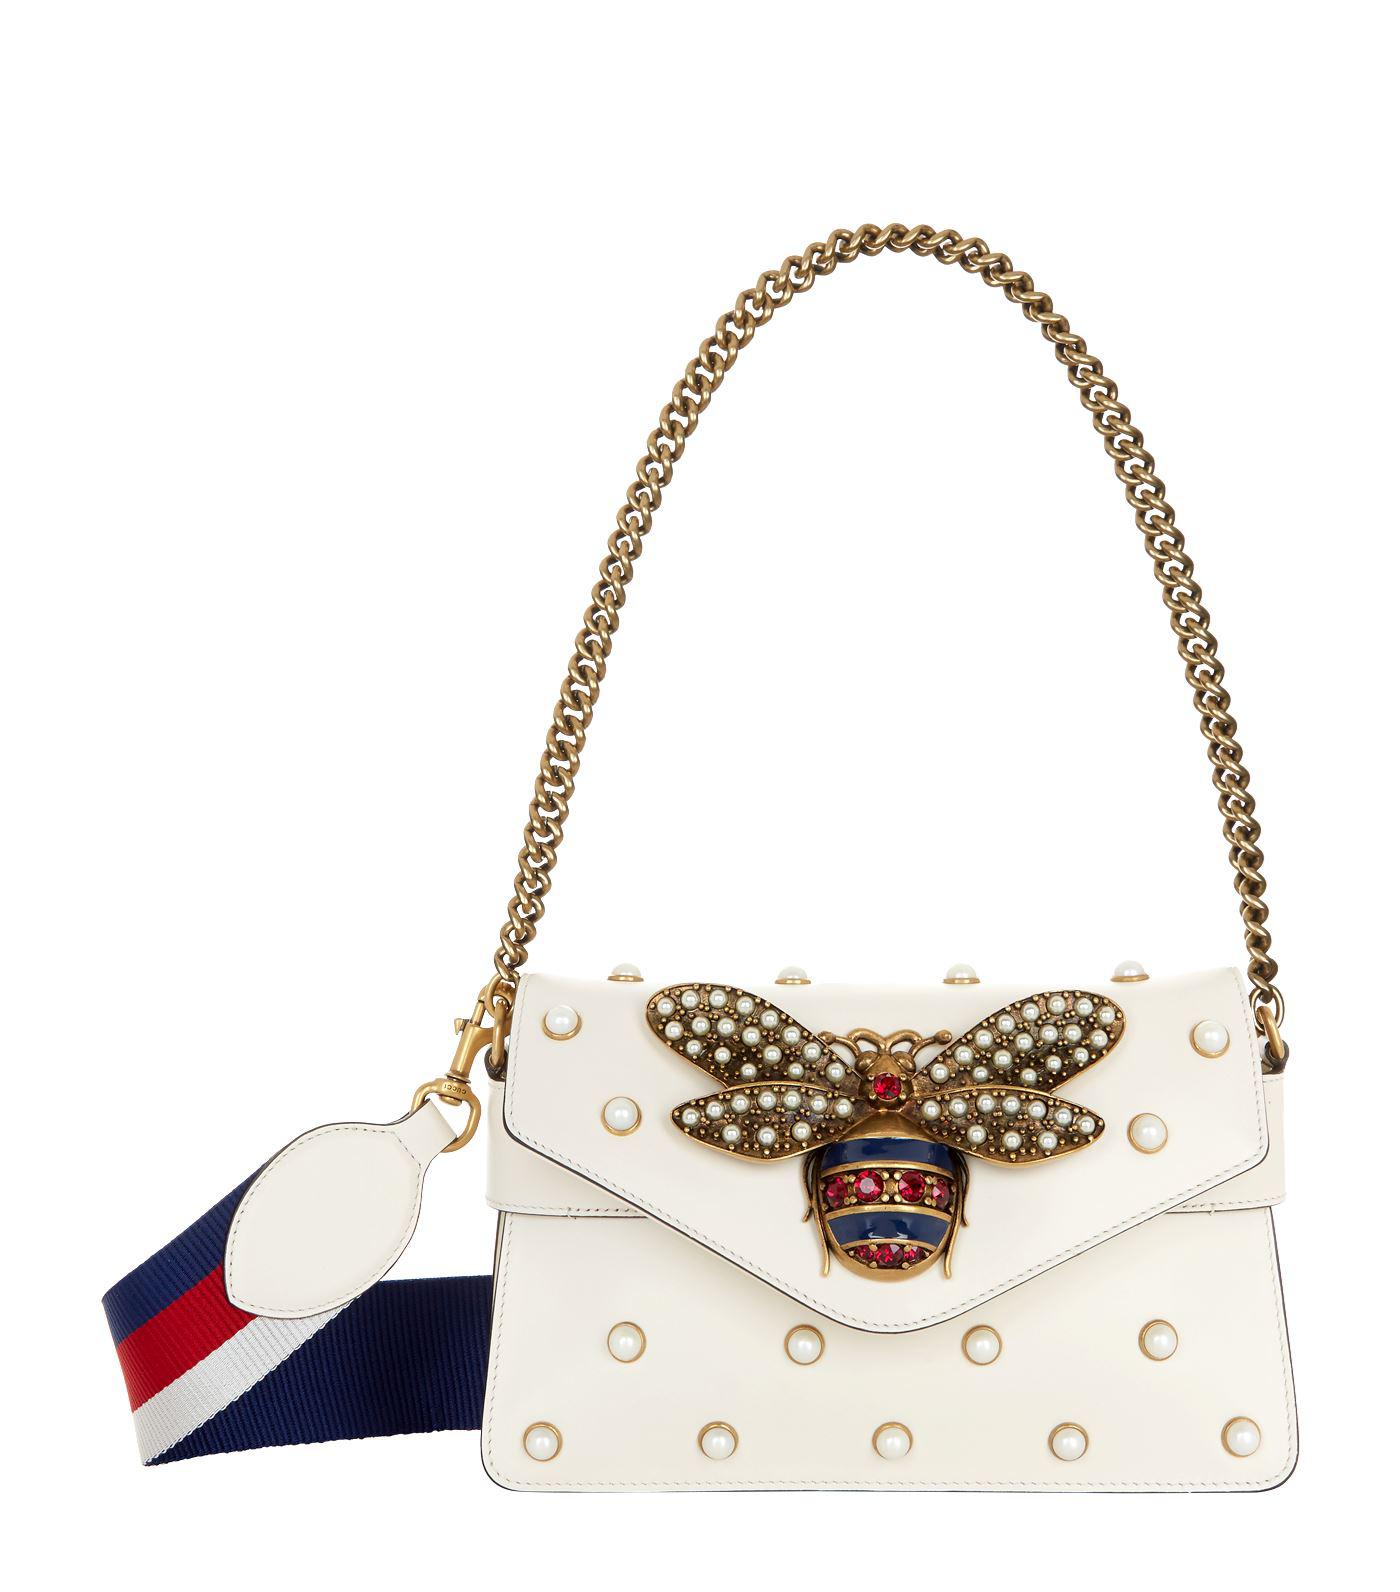 Gucci Embellished Broadway Bee Bag in White | Lyst